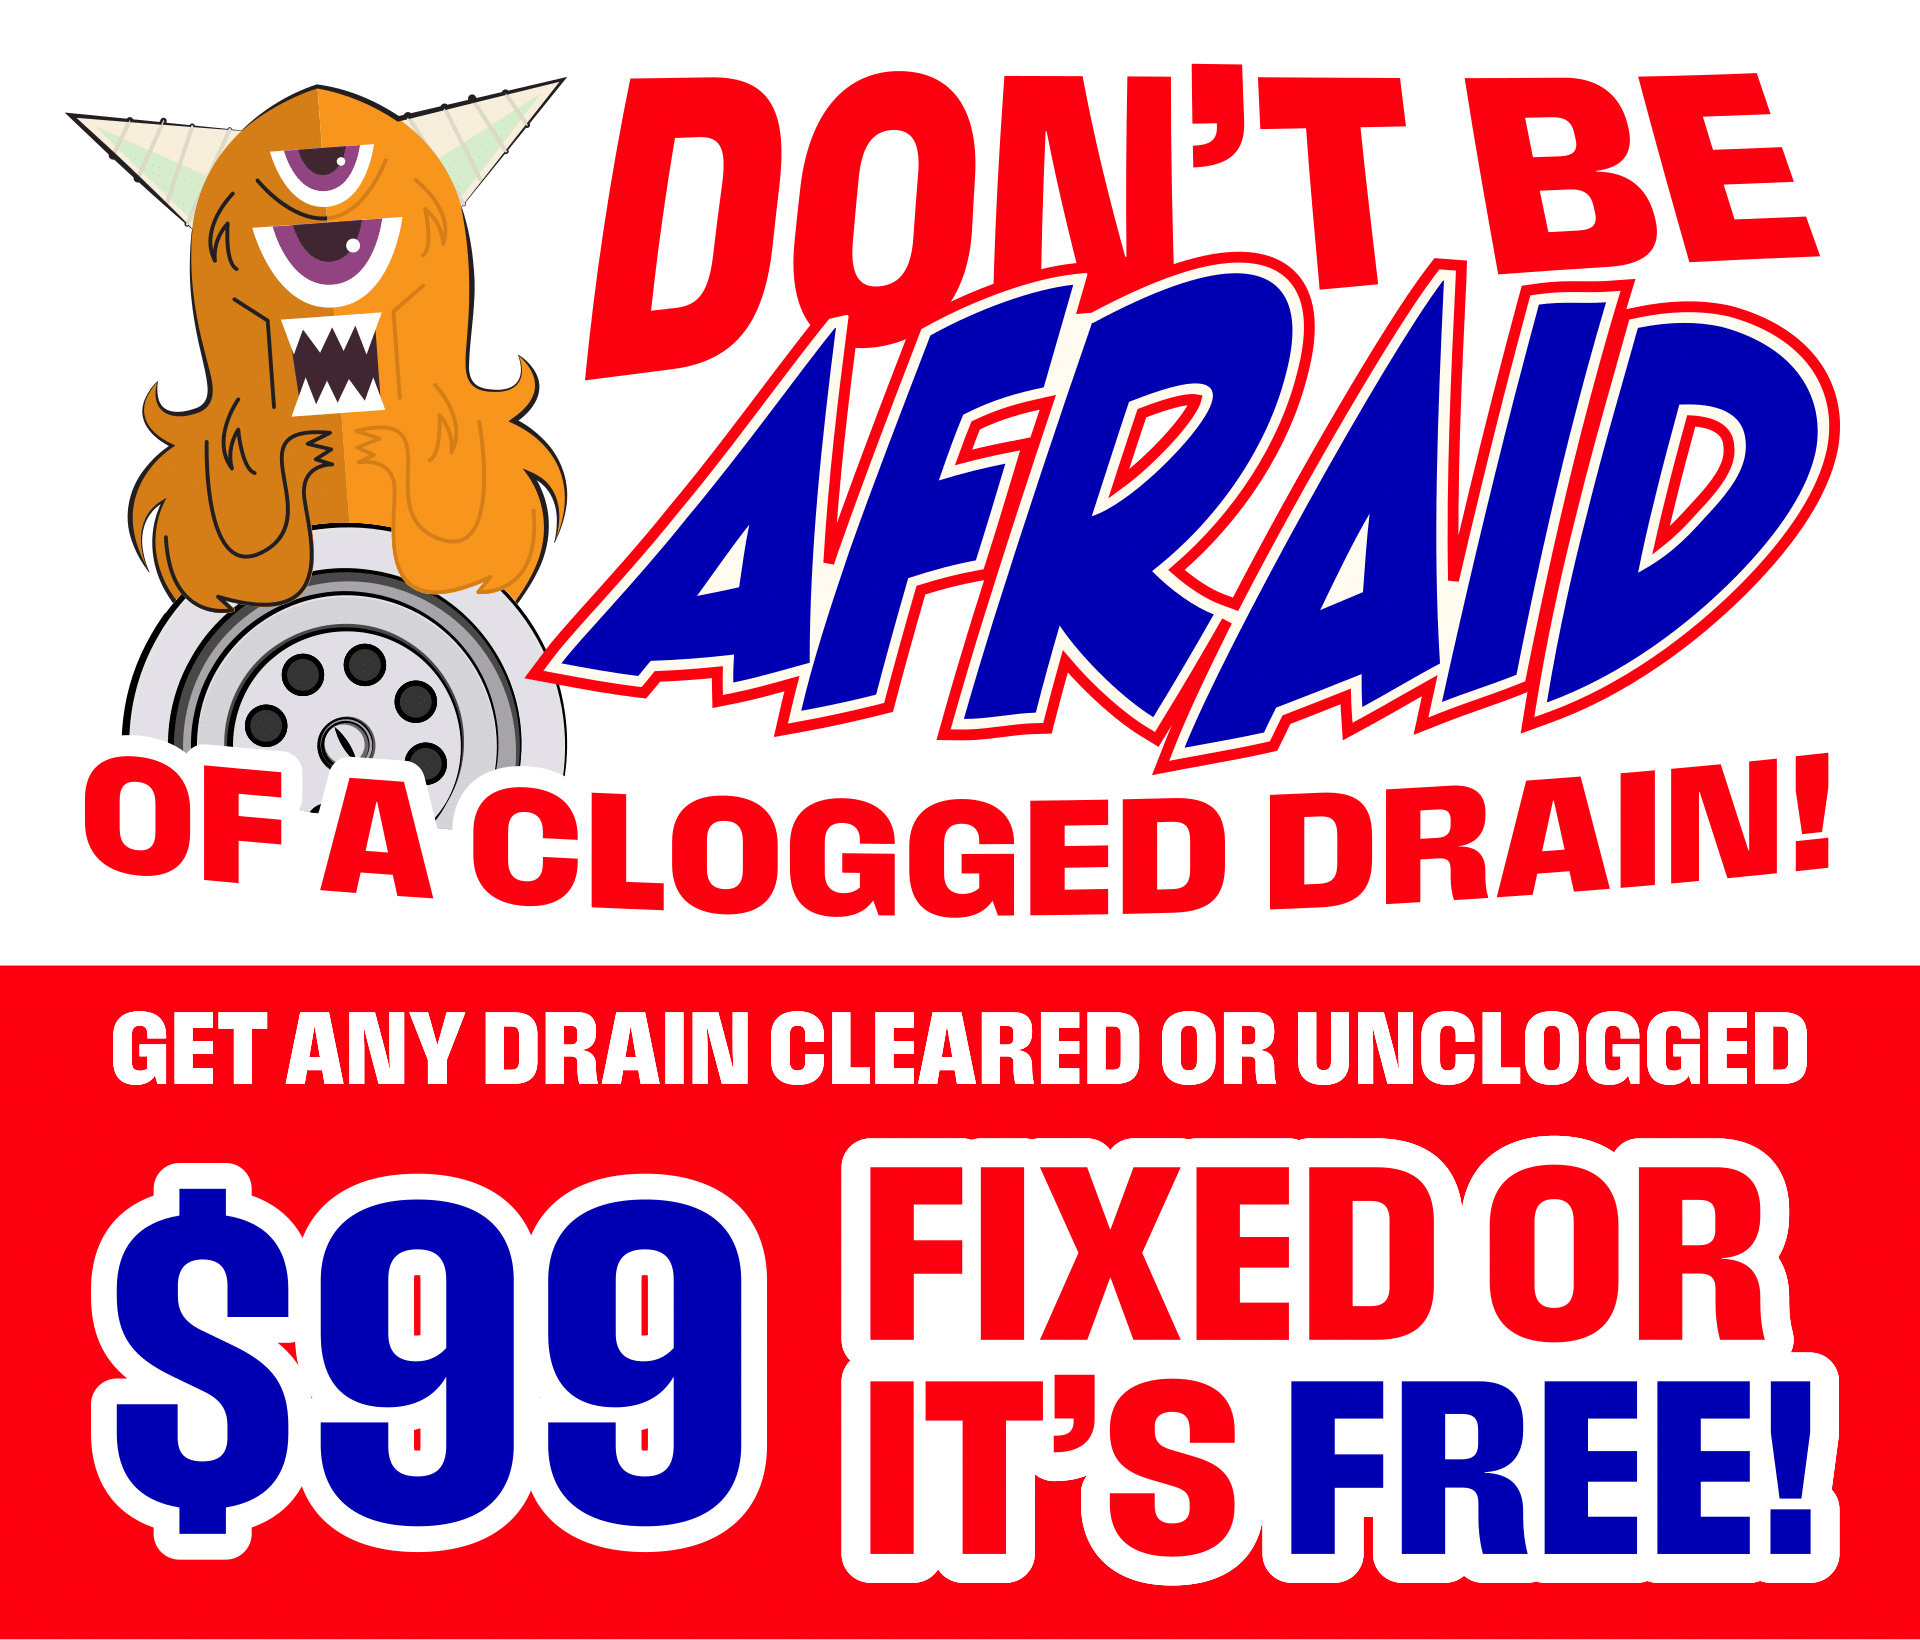 Clear Your Drain, Or It Is Free.